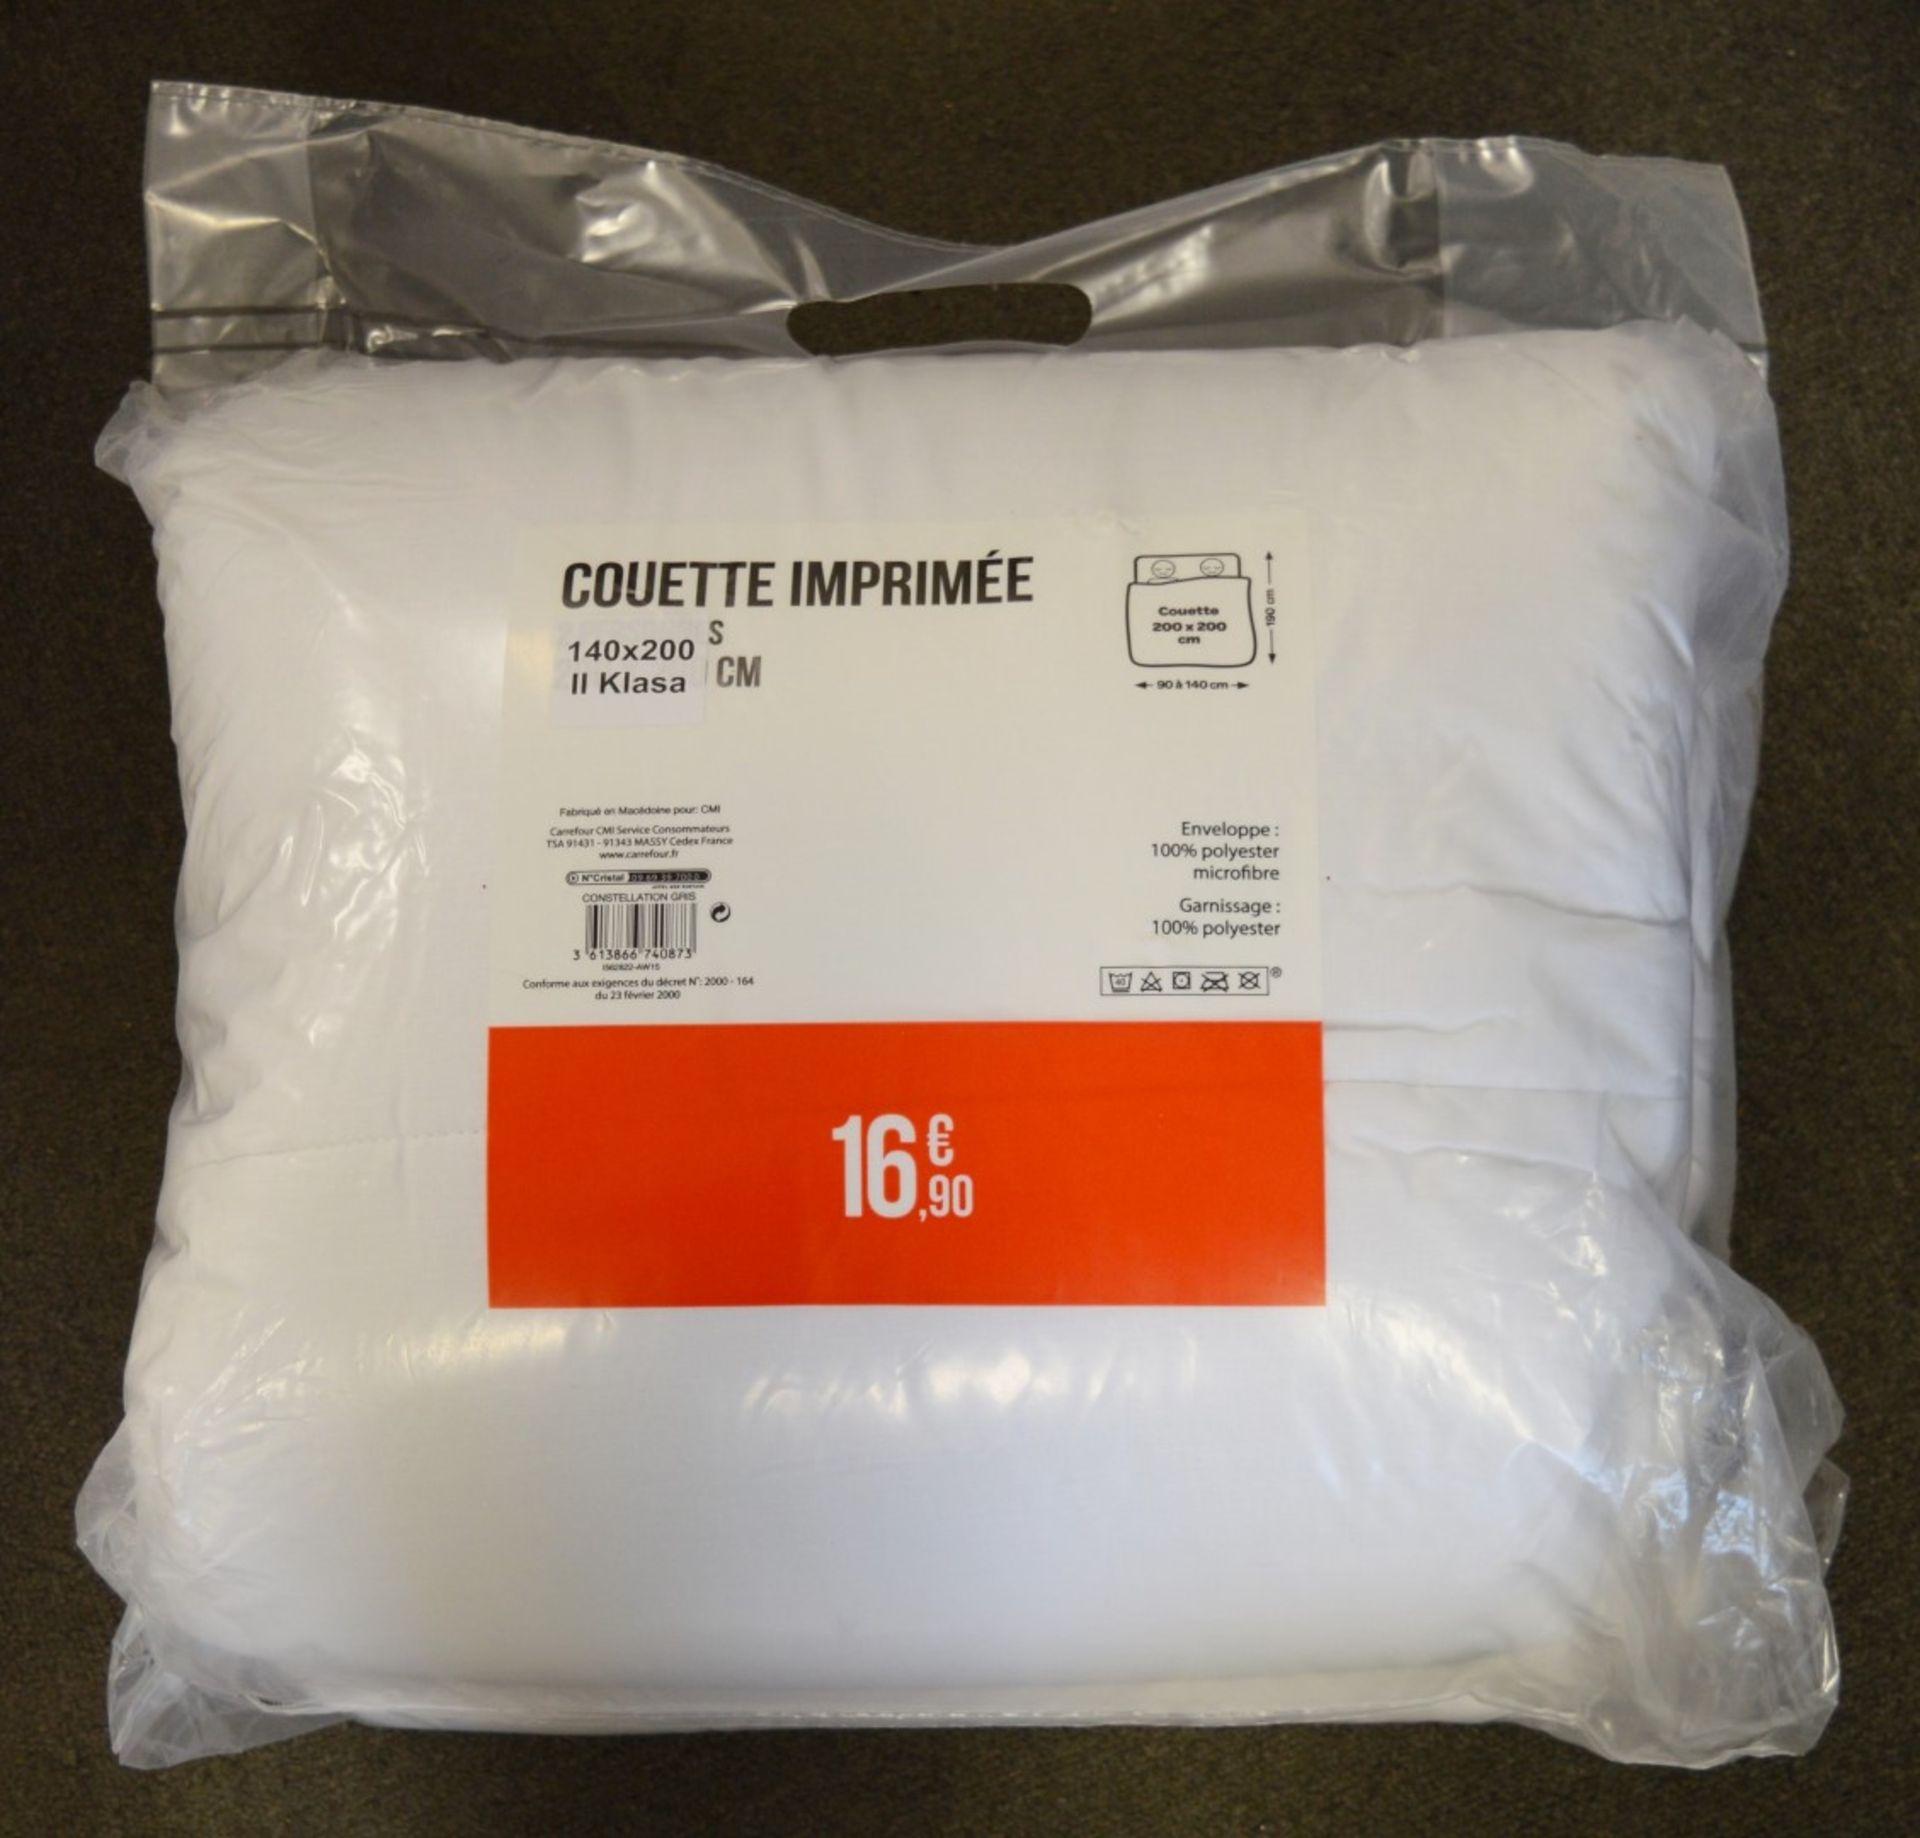 10 x Microfibre Duvets - Brand New Stock - 100% Polyester - CL007 - Location: Altrincham WA14 - - Image 5 of 6